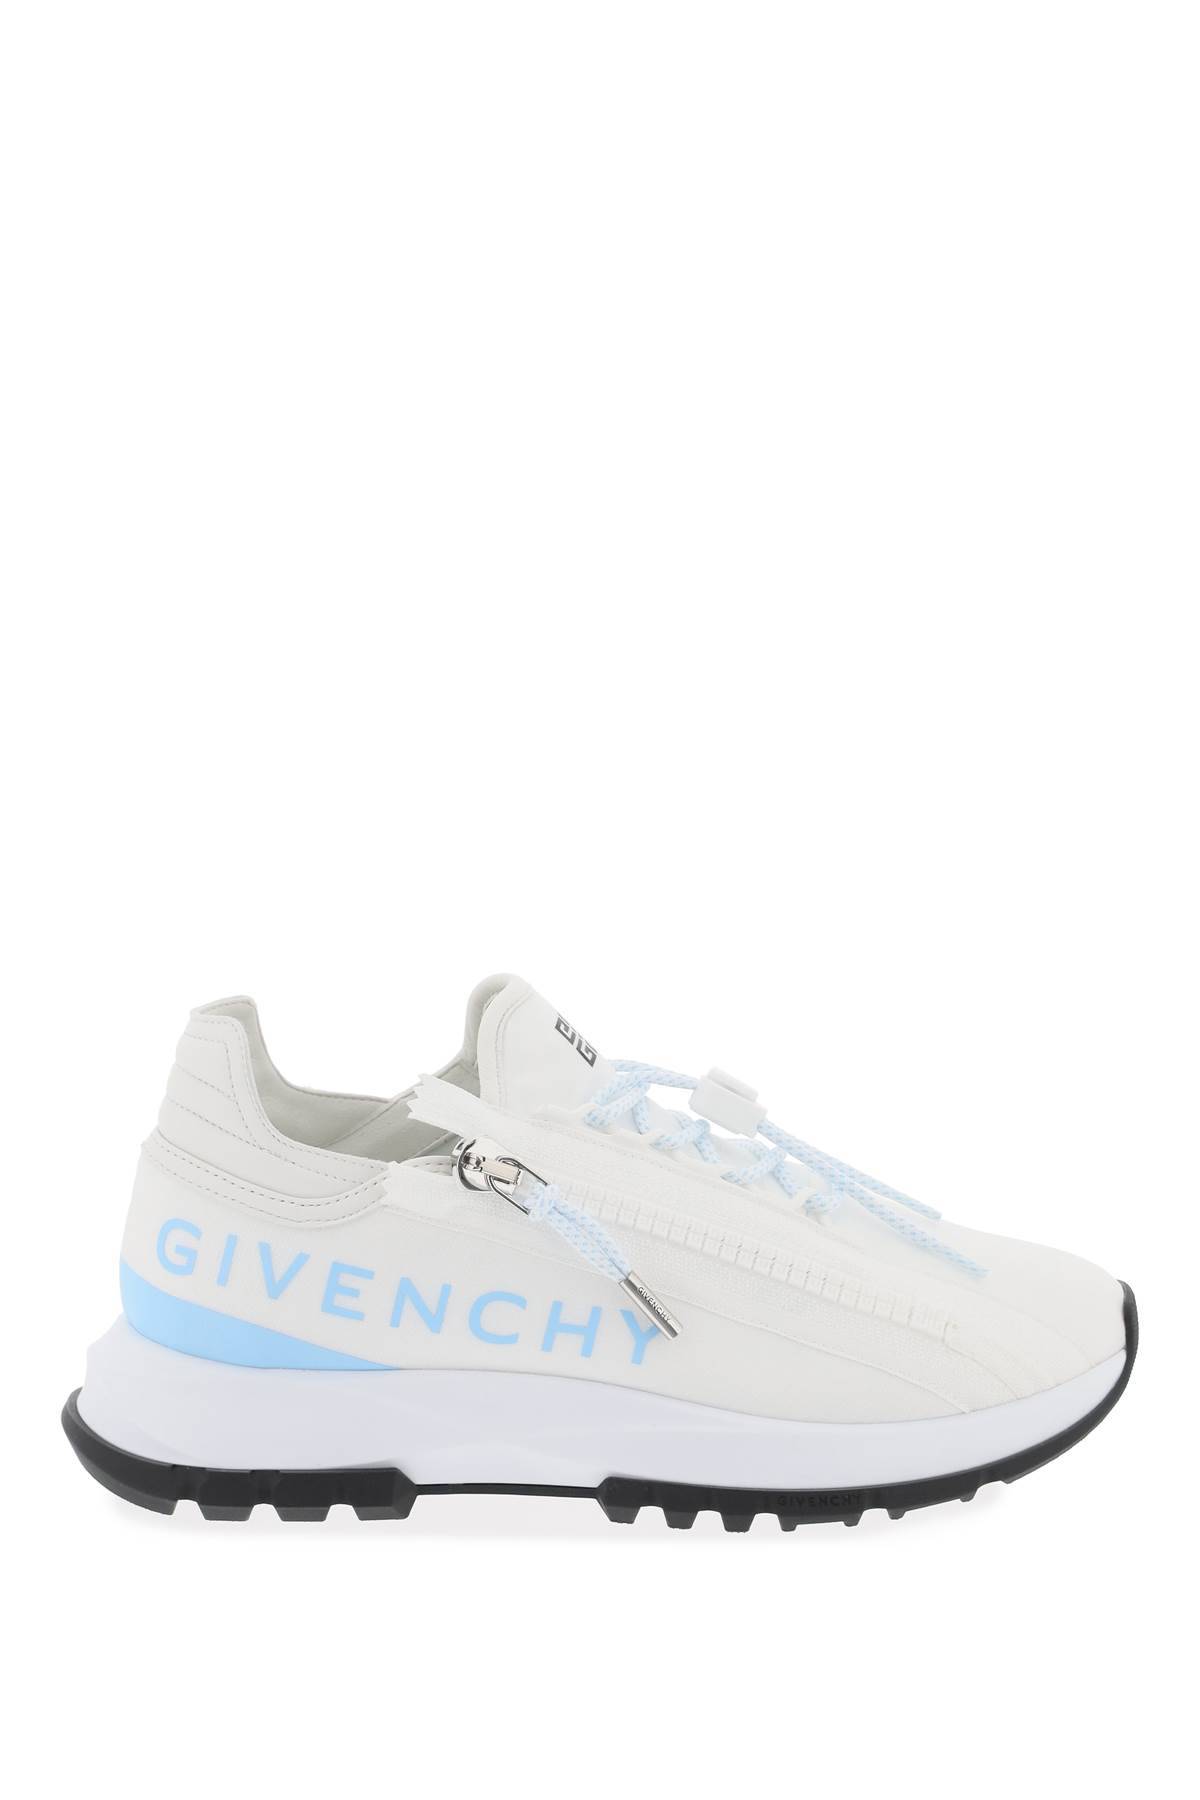 Shop Givenchy Spectre Sne In White,light Blue